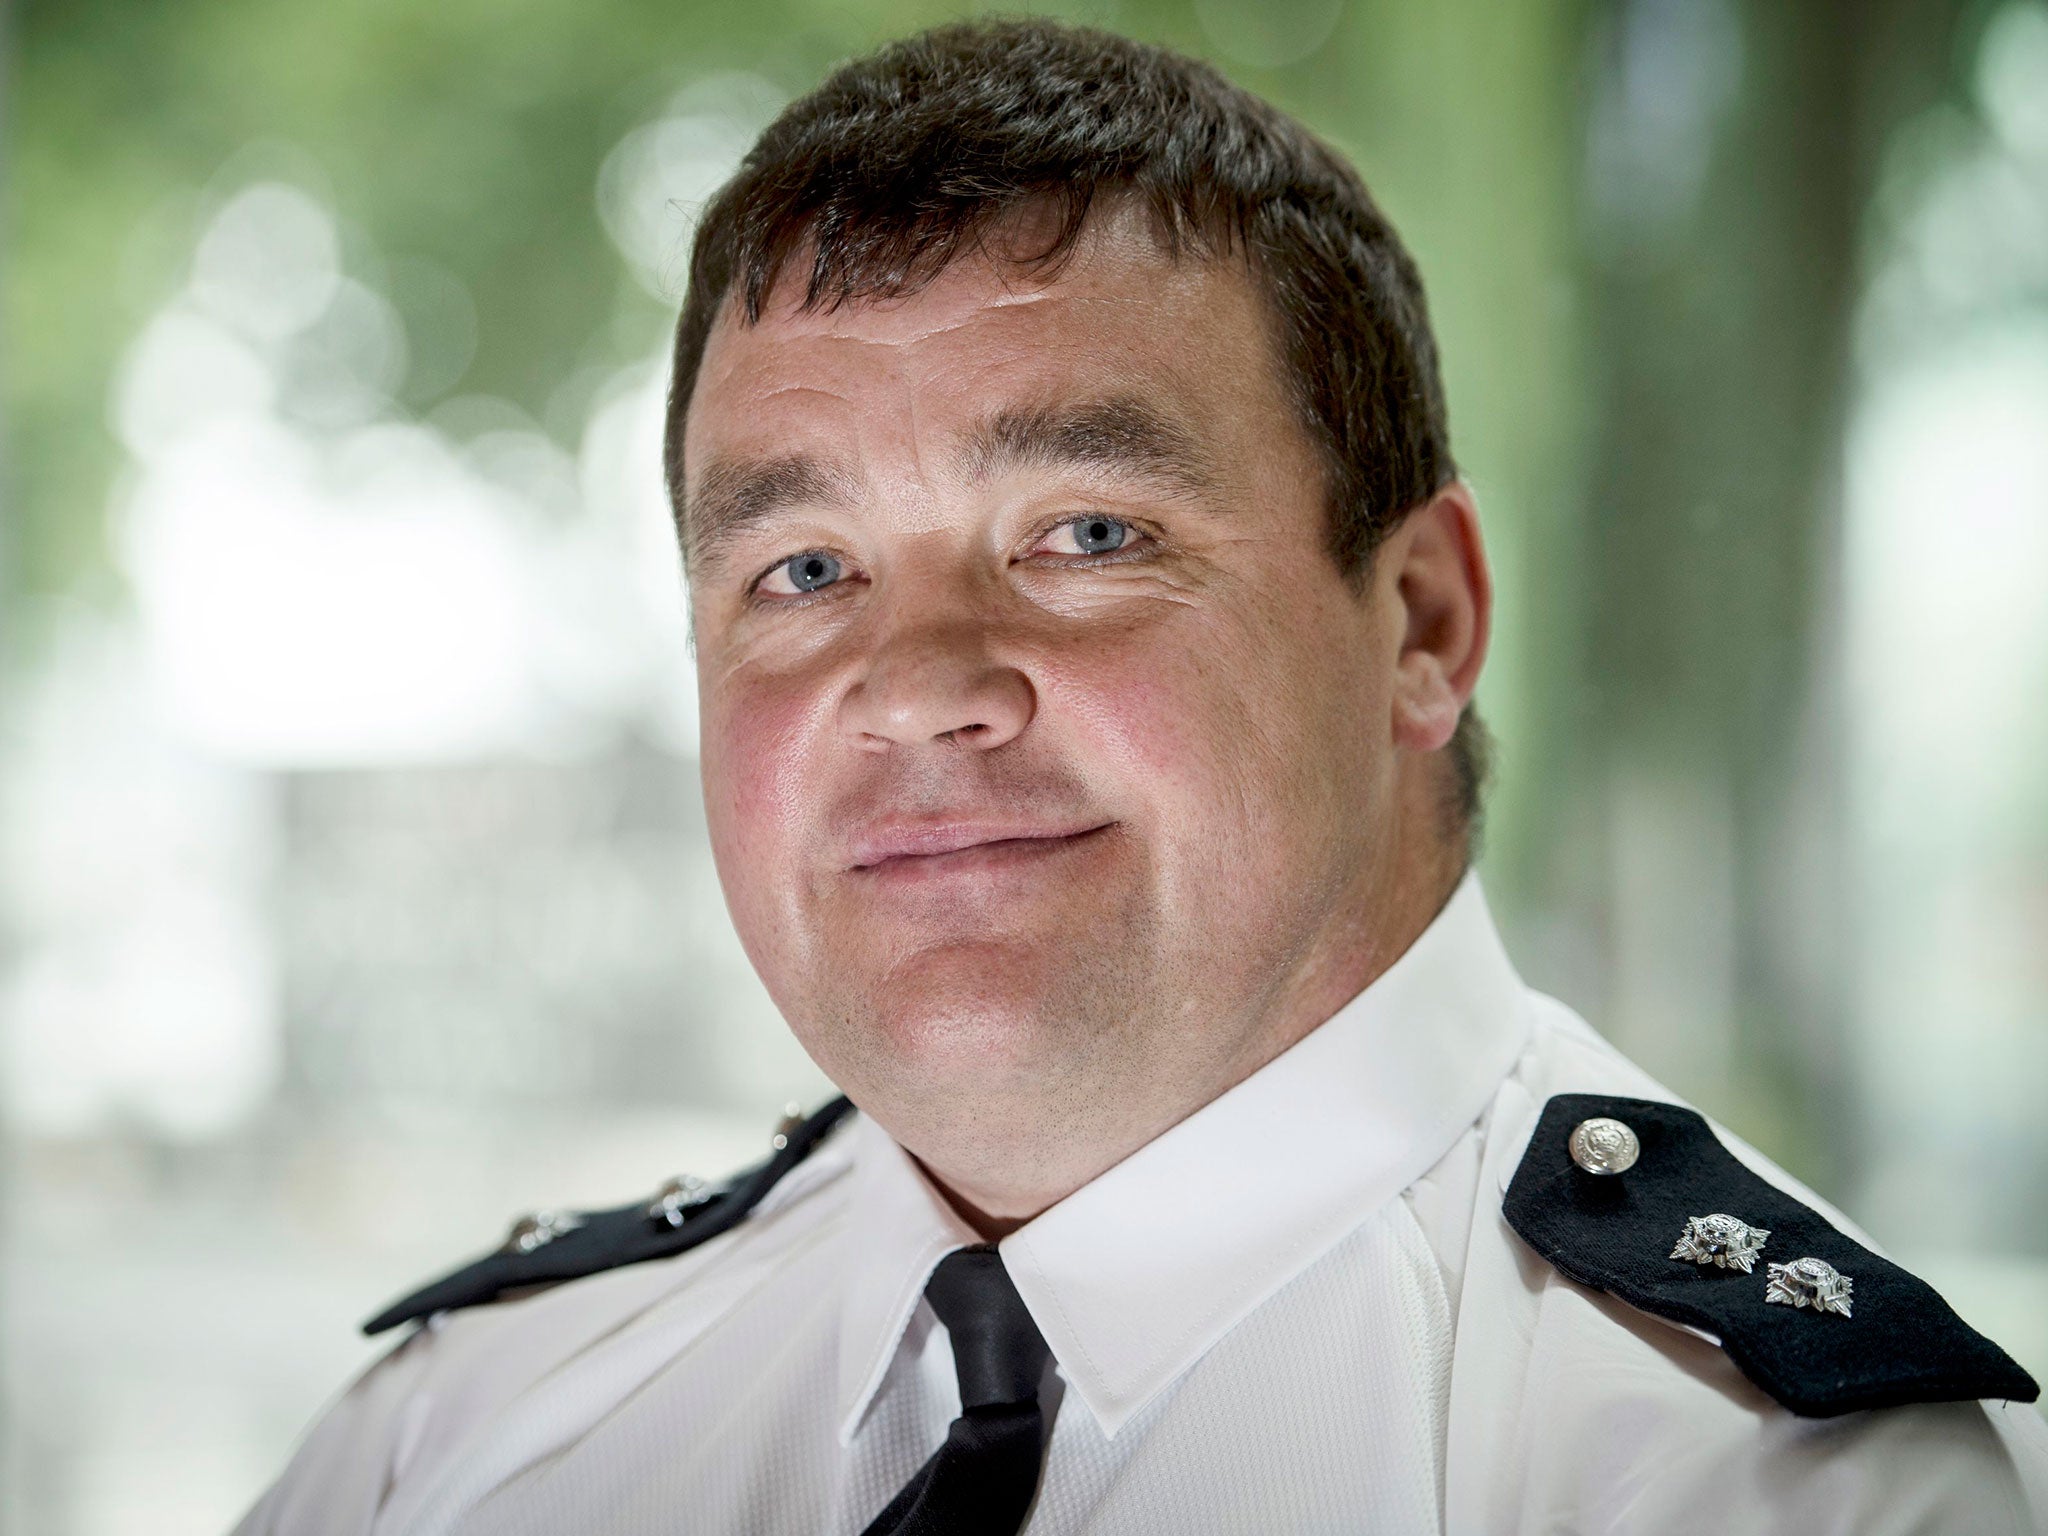 Inspector Nick Thatcher, who was one of the first police inspectors on the scene at the Grenfell Tower fire